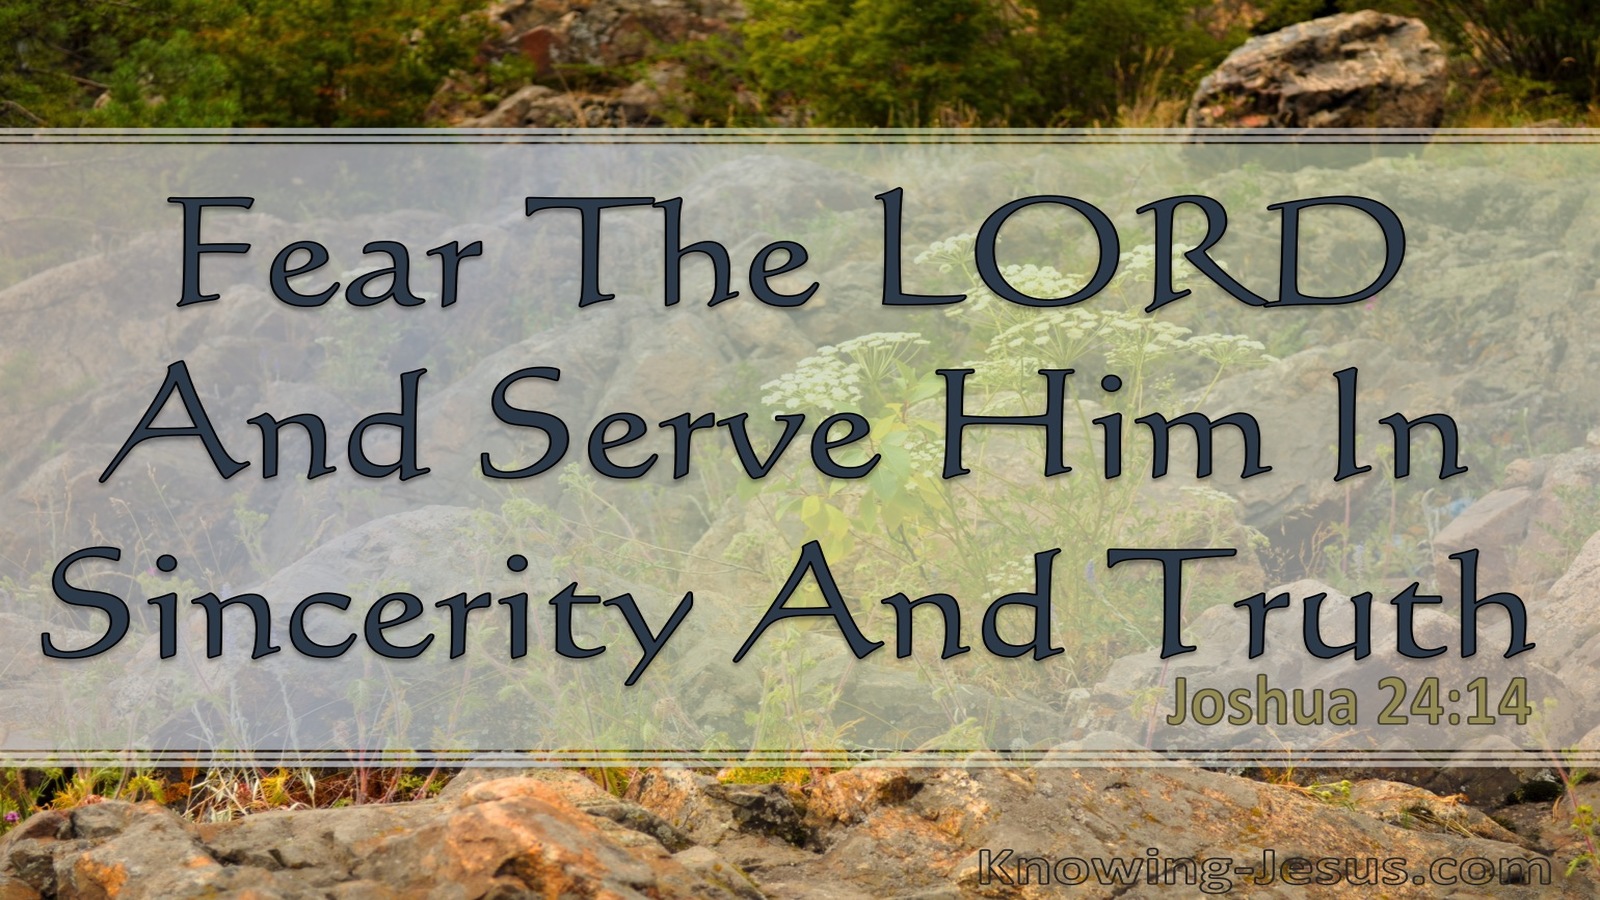 Joshua 24:14 Serve The Lord In Sincerity And Truth (green)